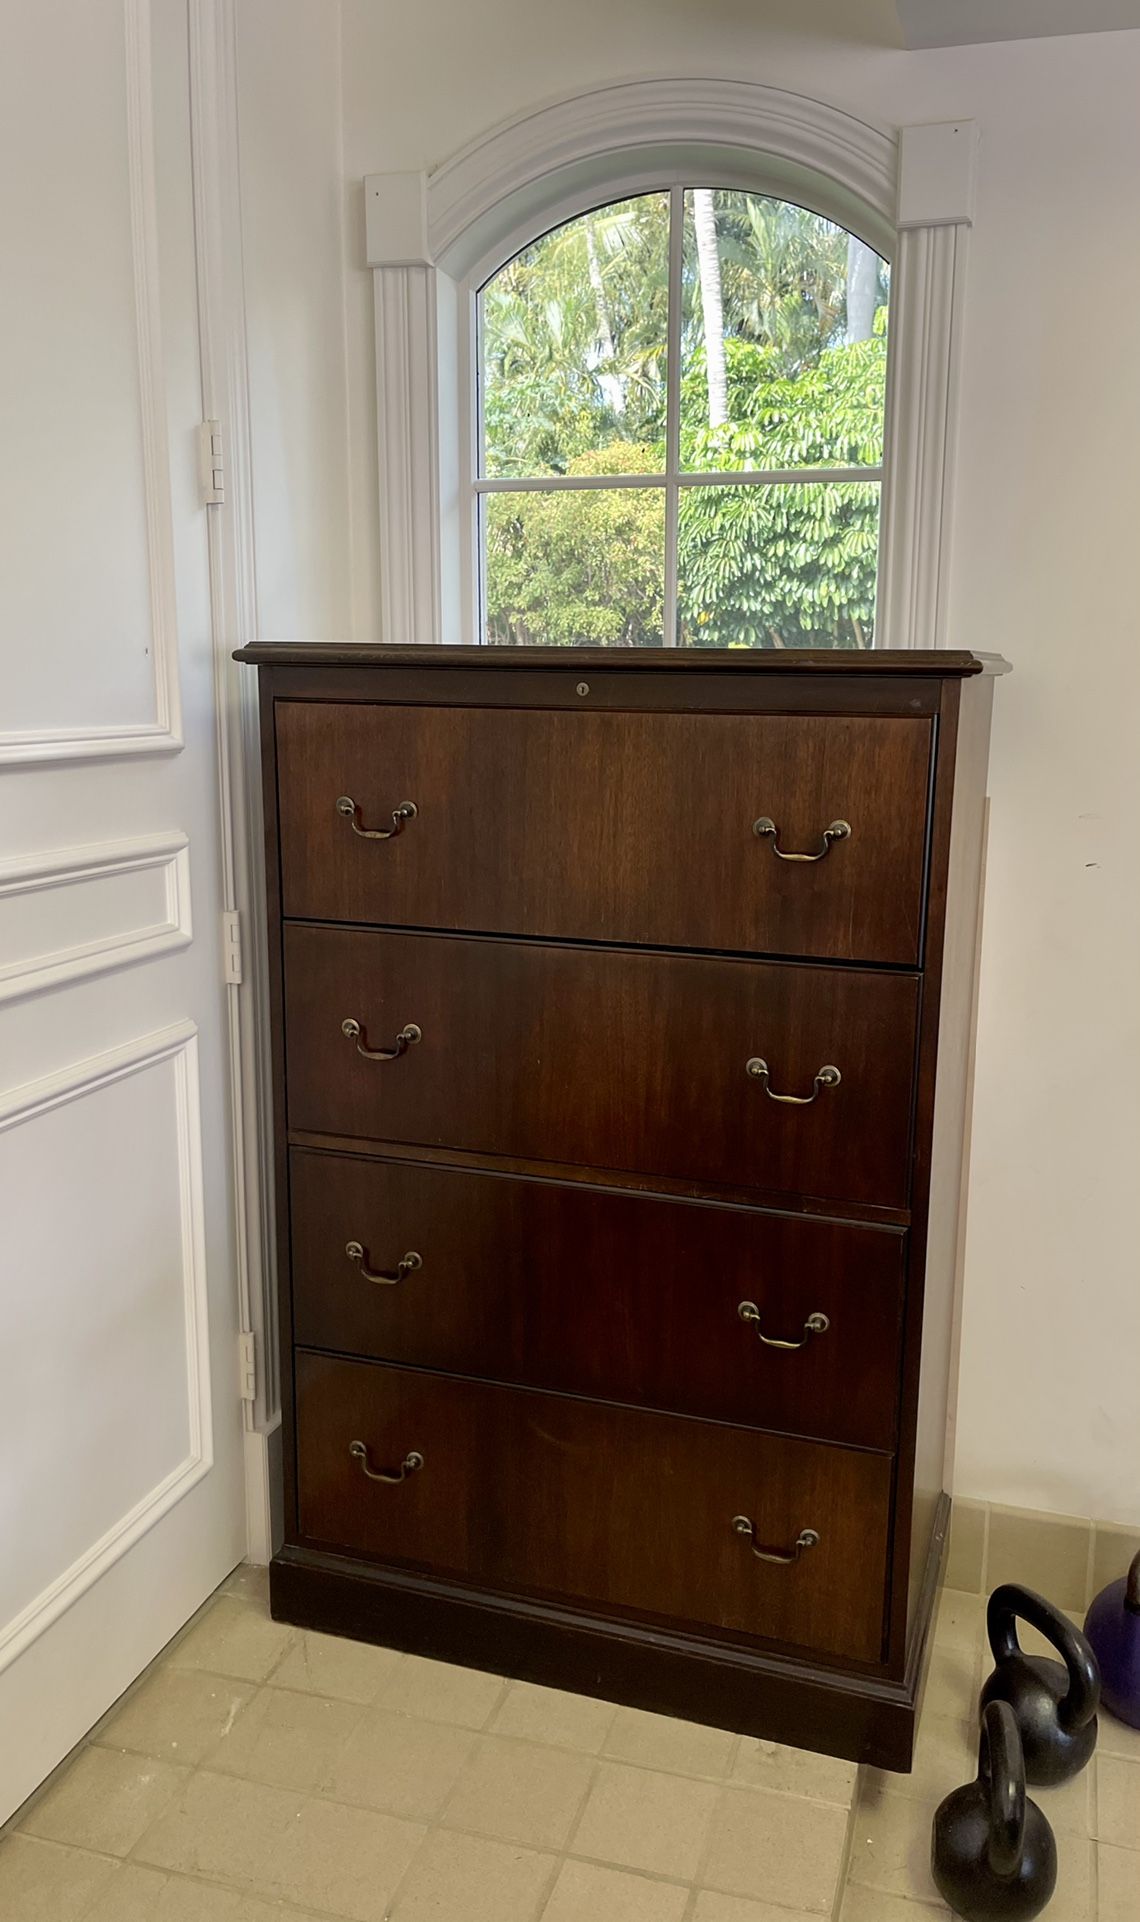 Tall File Cabinet 